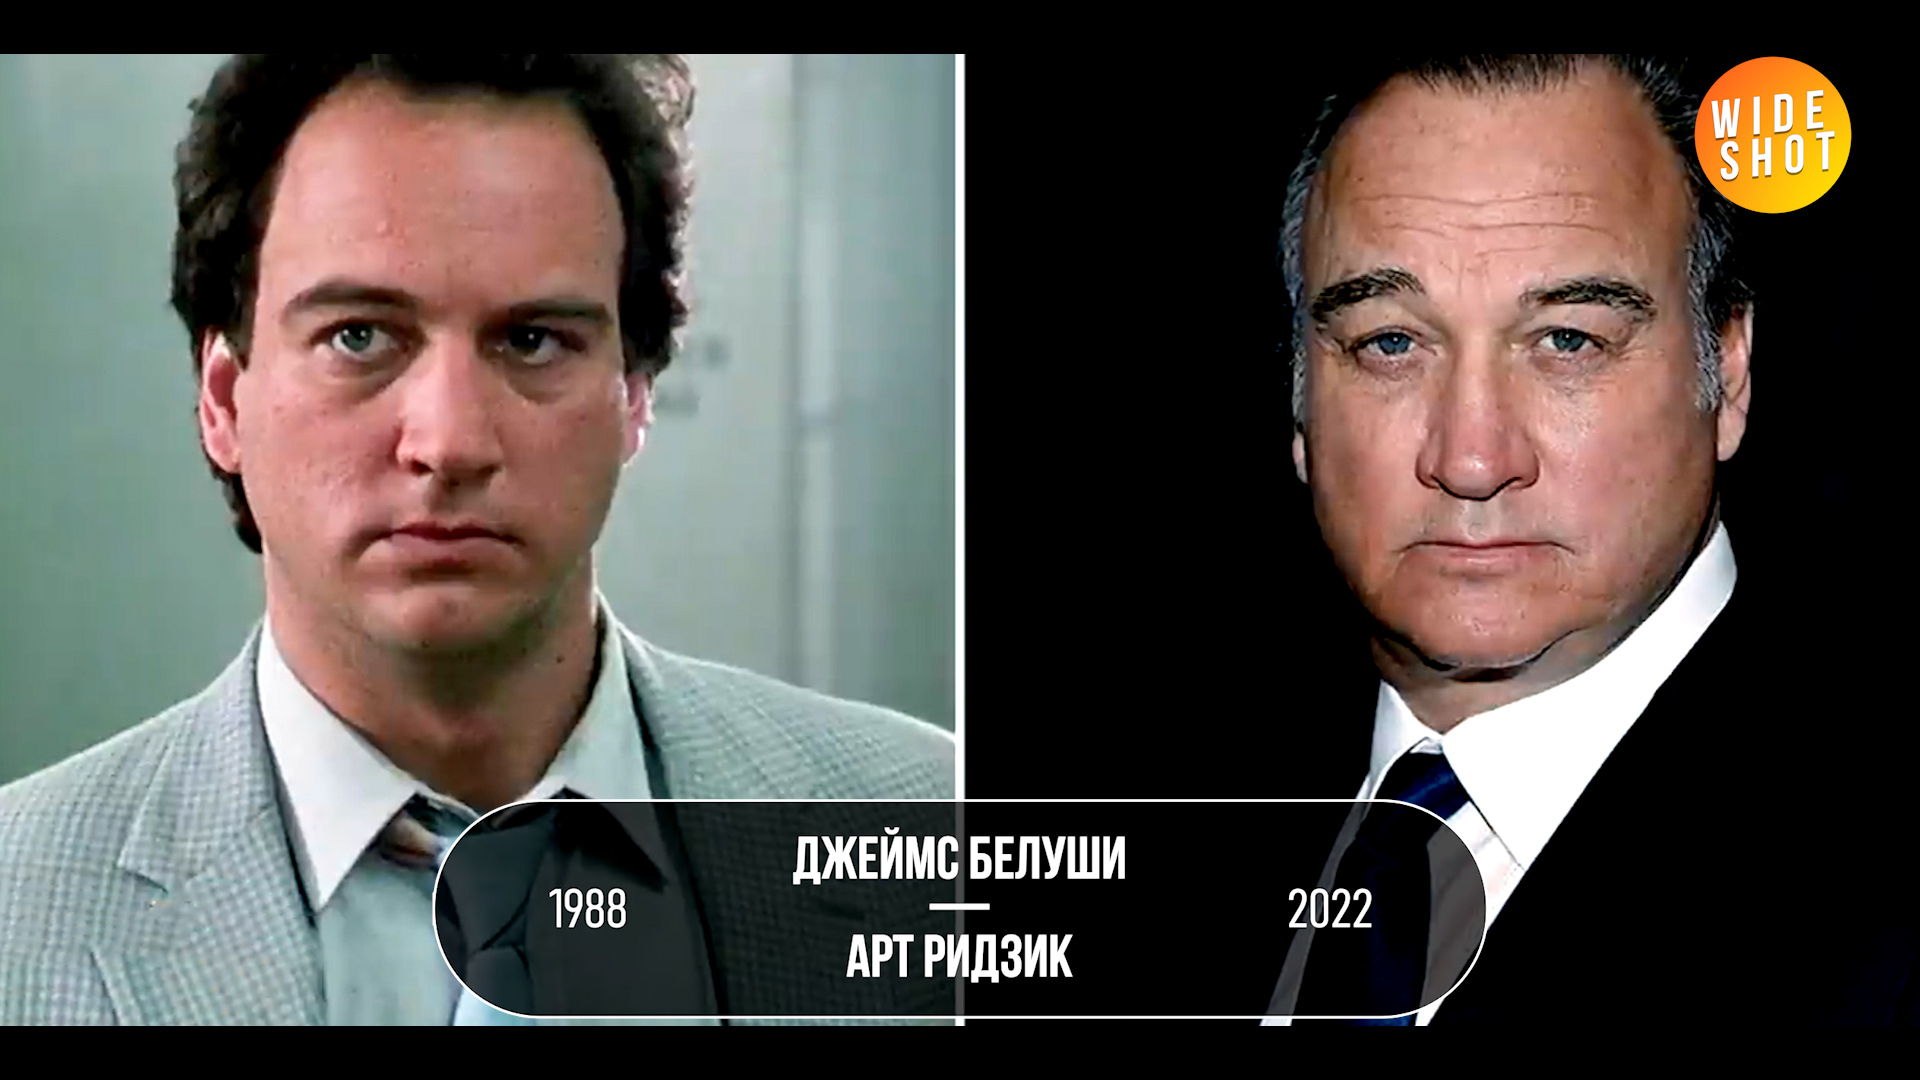 RED HEAT: THE ACTORS THEN AND NOW (1988 vs. 2022) - Hollywood, Actors and actresses, Video review, Celebrities, Movies, It Was-It Was, Red heat, Arnold Schwarzenegger, Боевики, Movies of the 80s, I advise you to look, What to see, Video, Youtube, Longpost